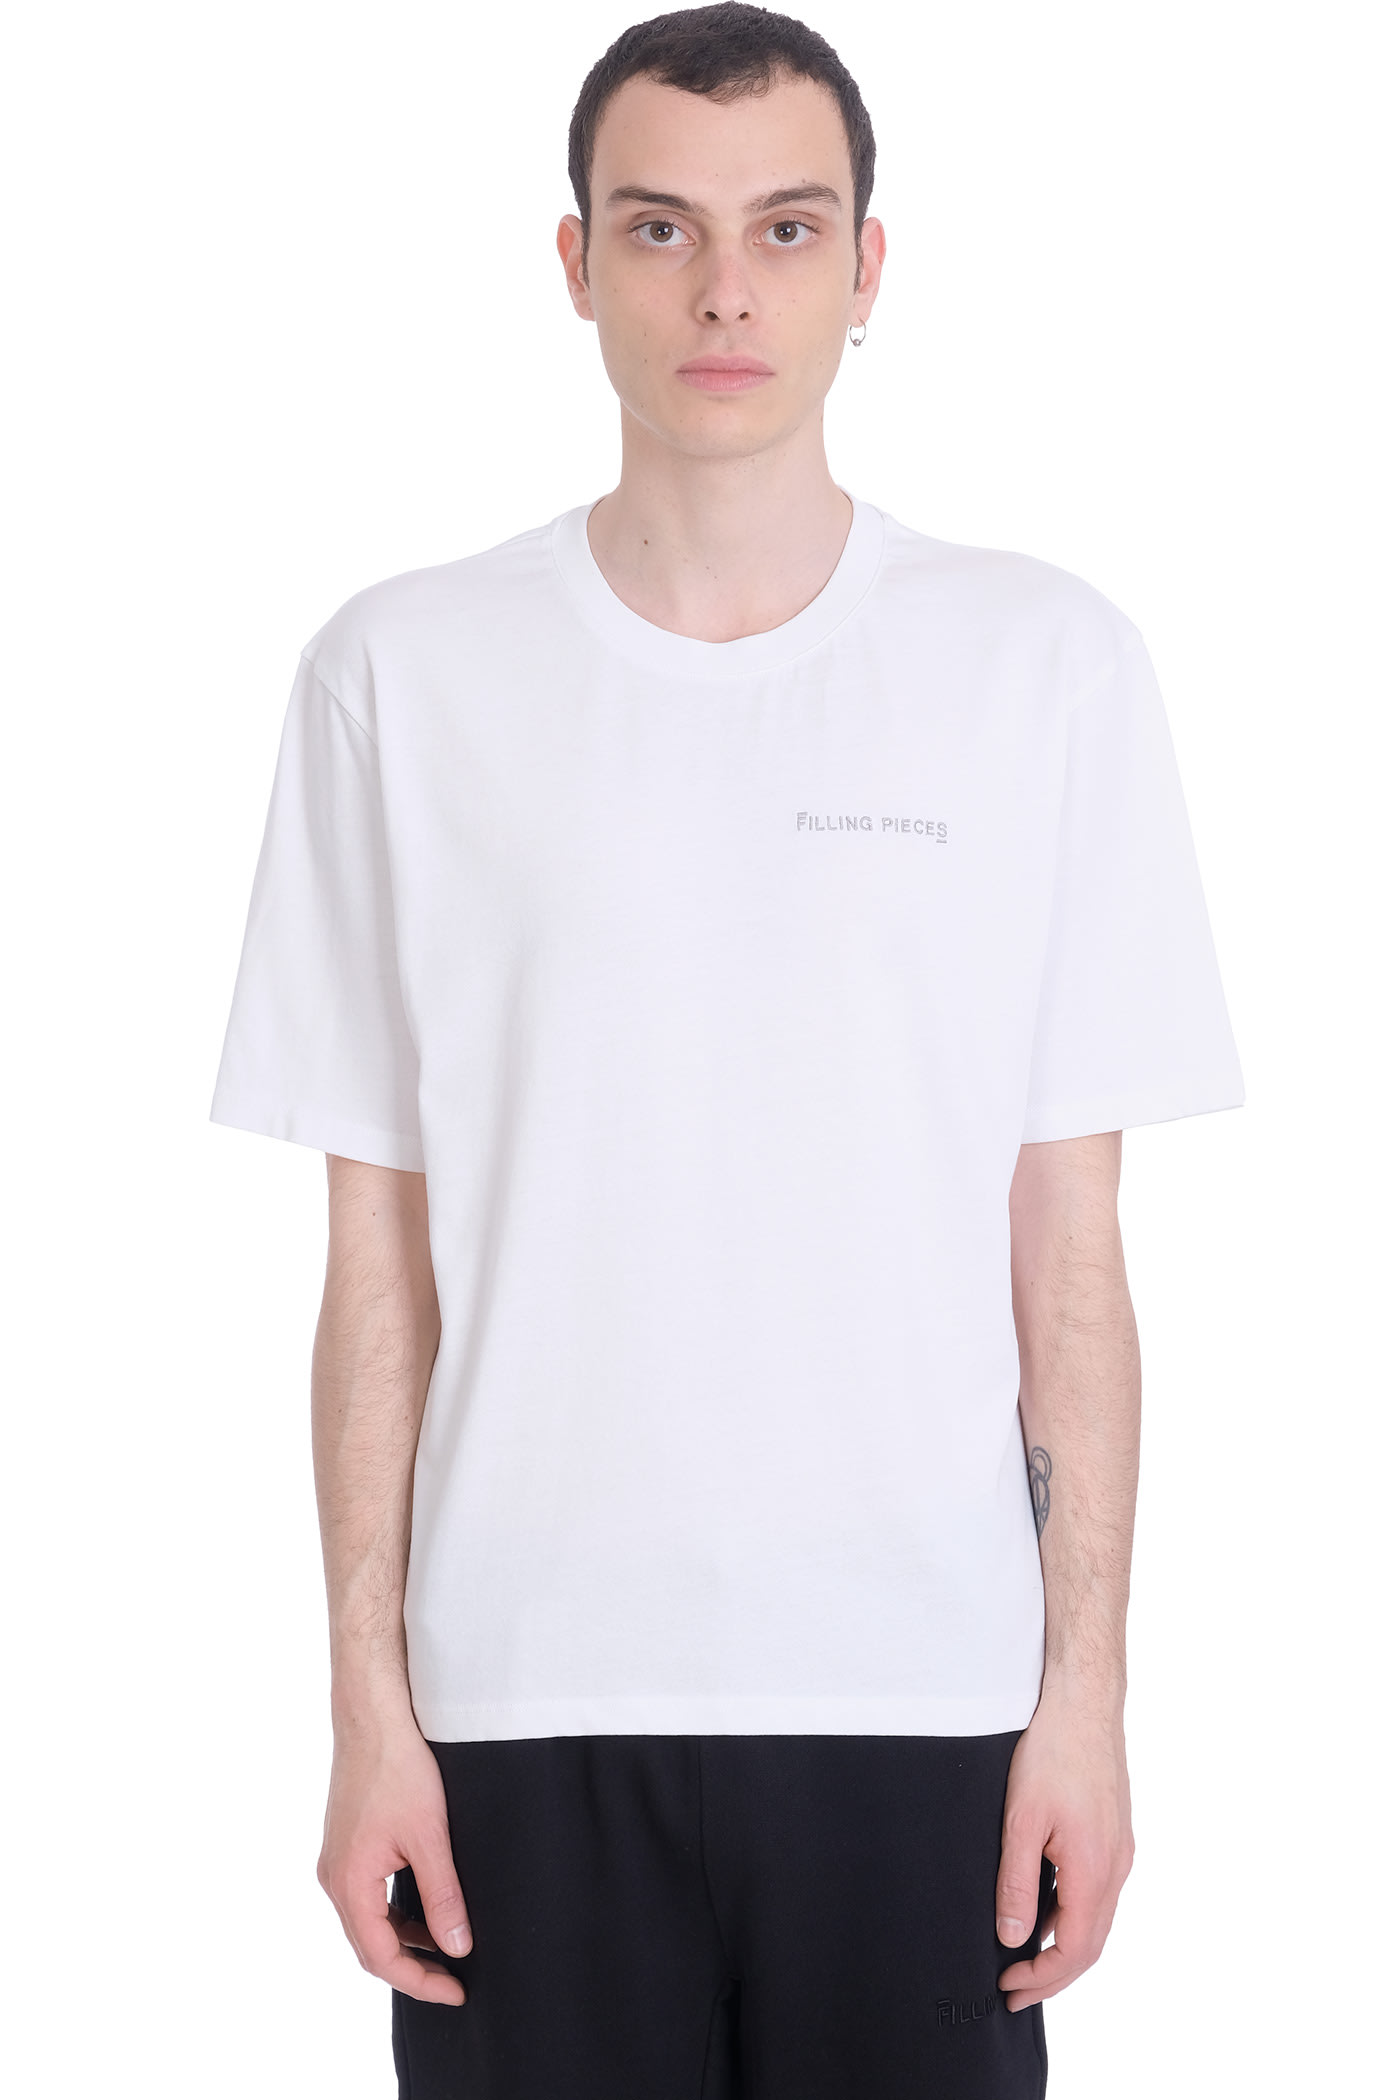 Filling Pieces T-shirt In White Cotton